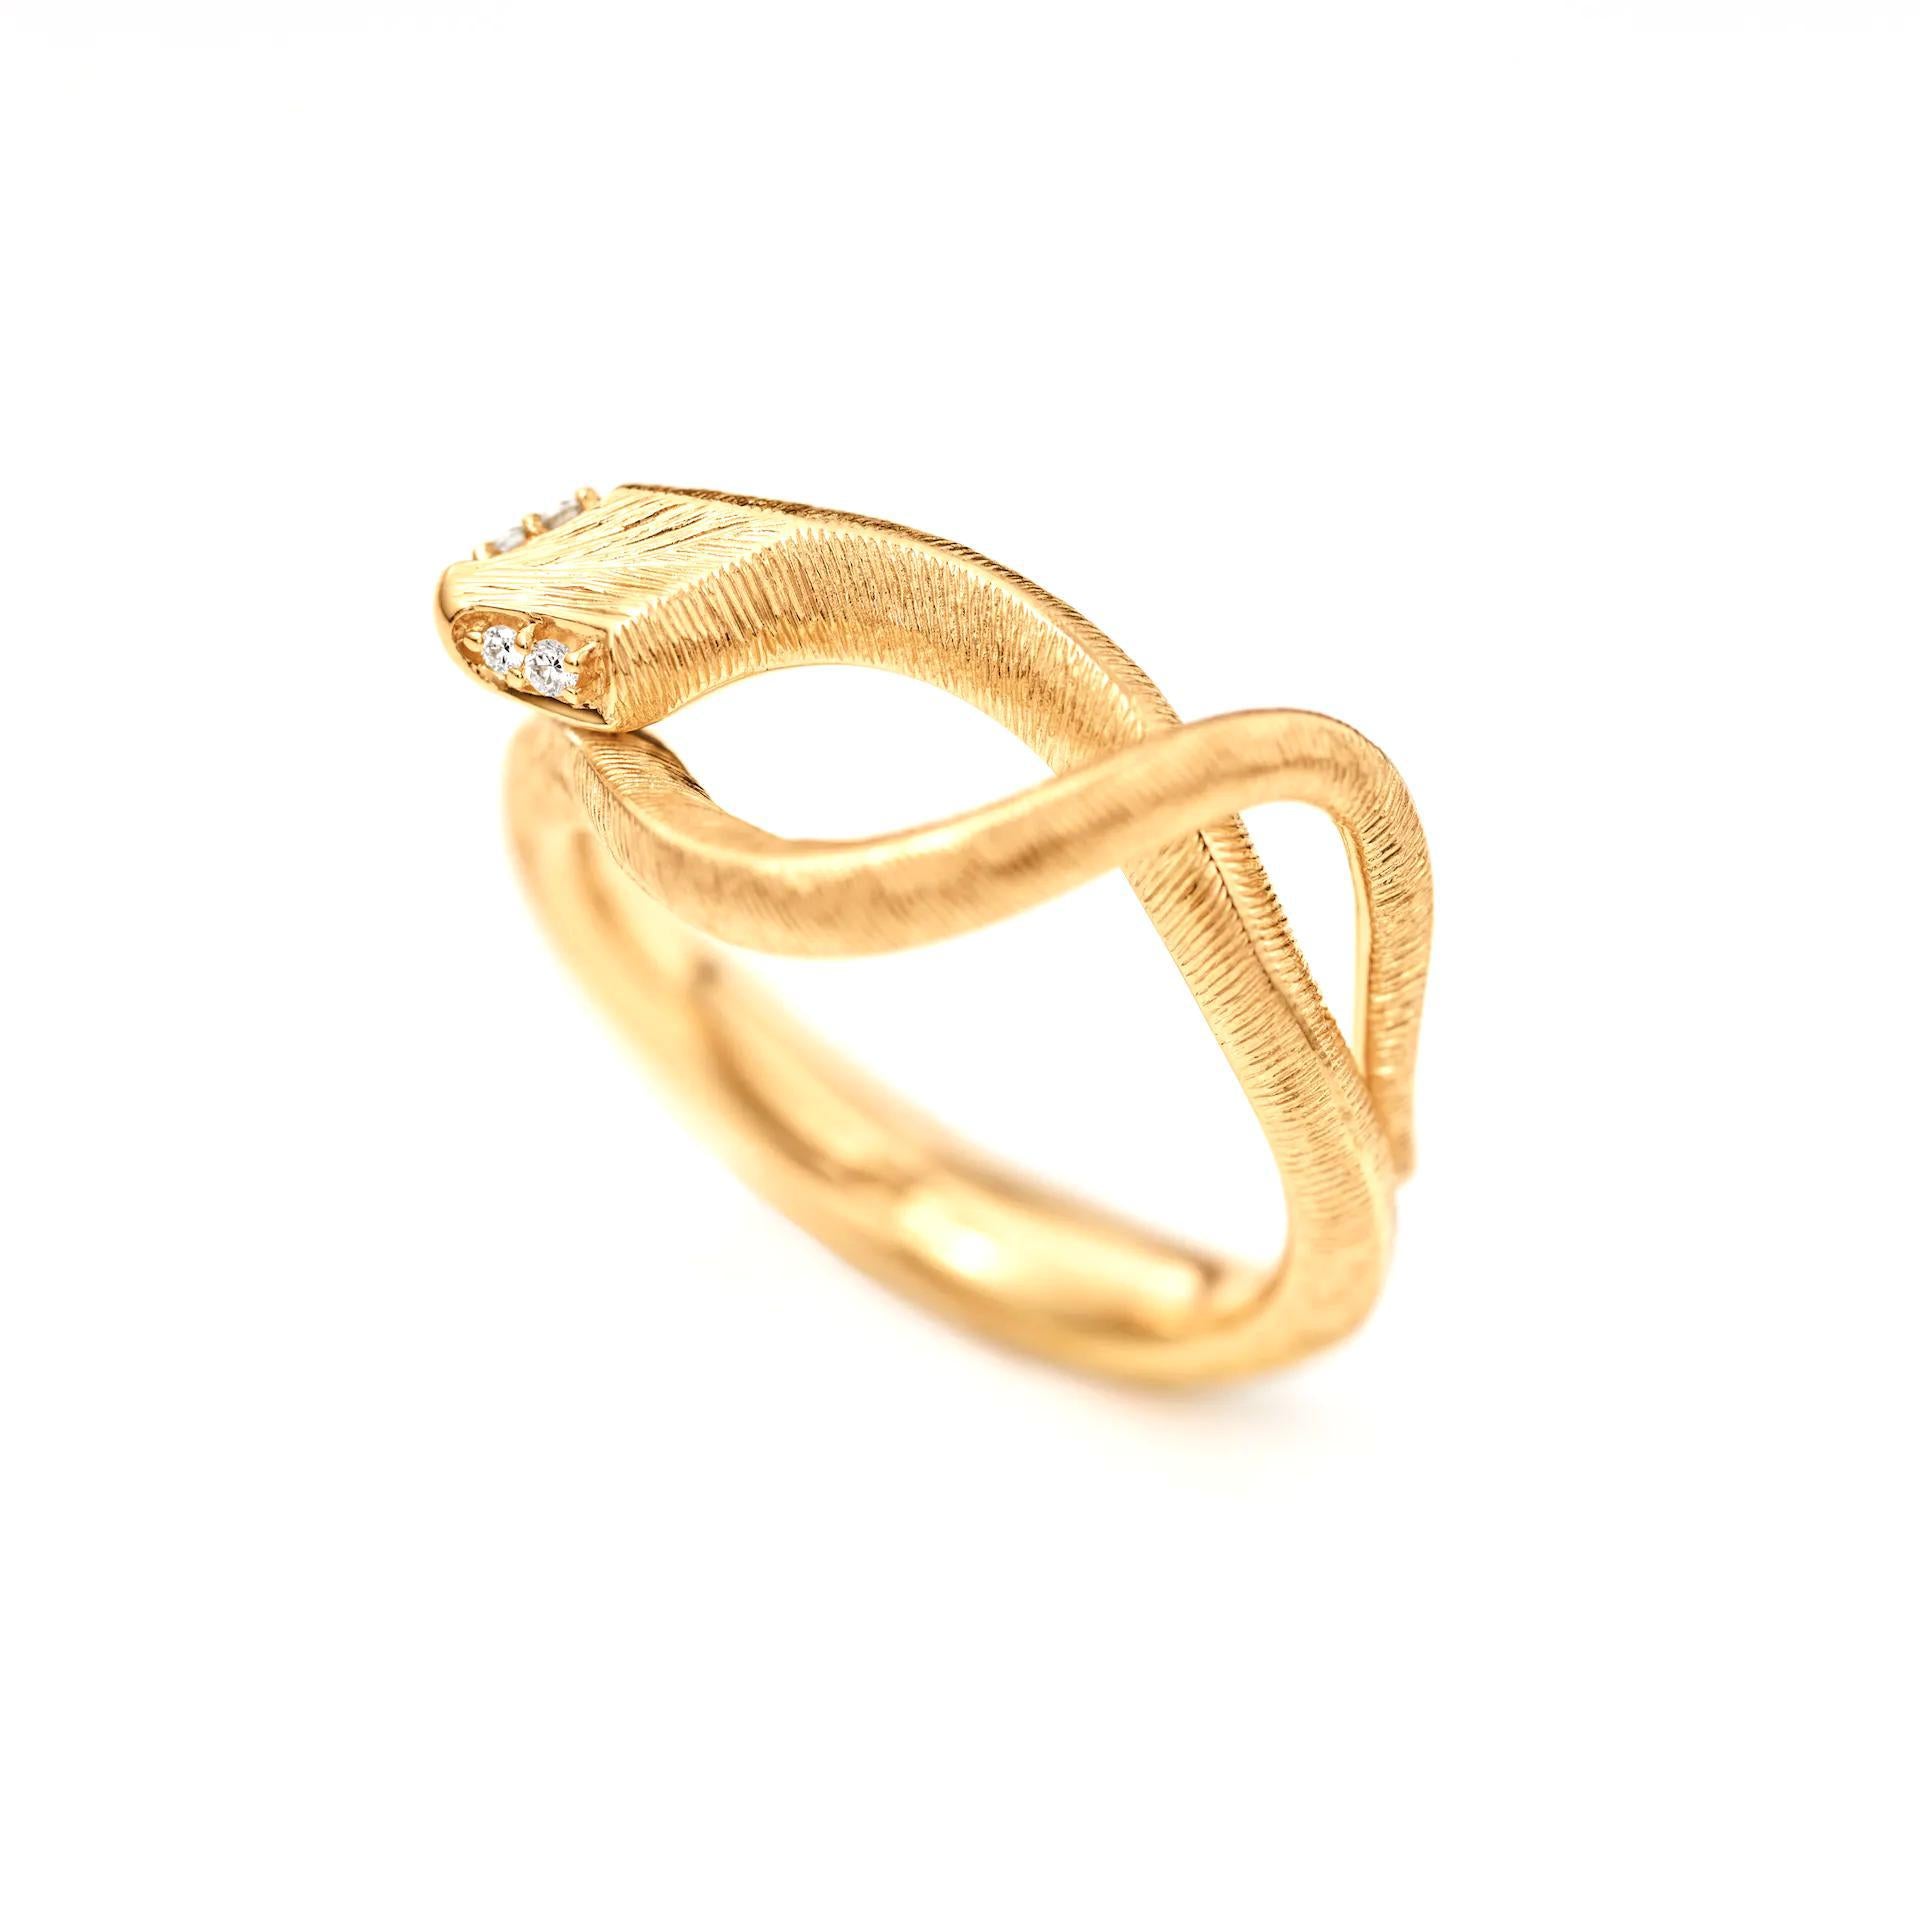 Ole Lynggaard Ring Snakes, Gelbgold, A2672-401